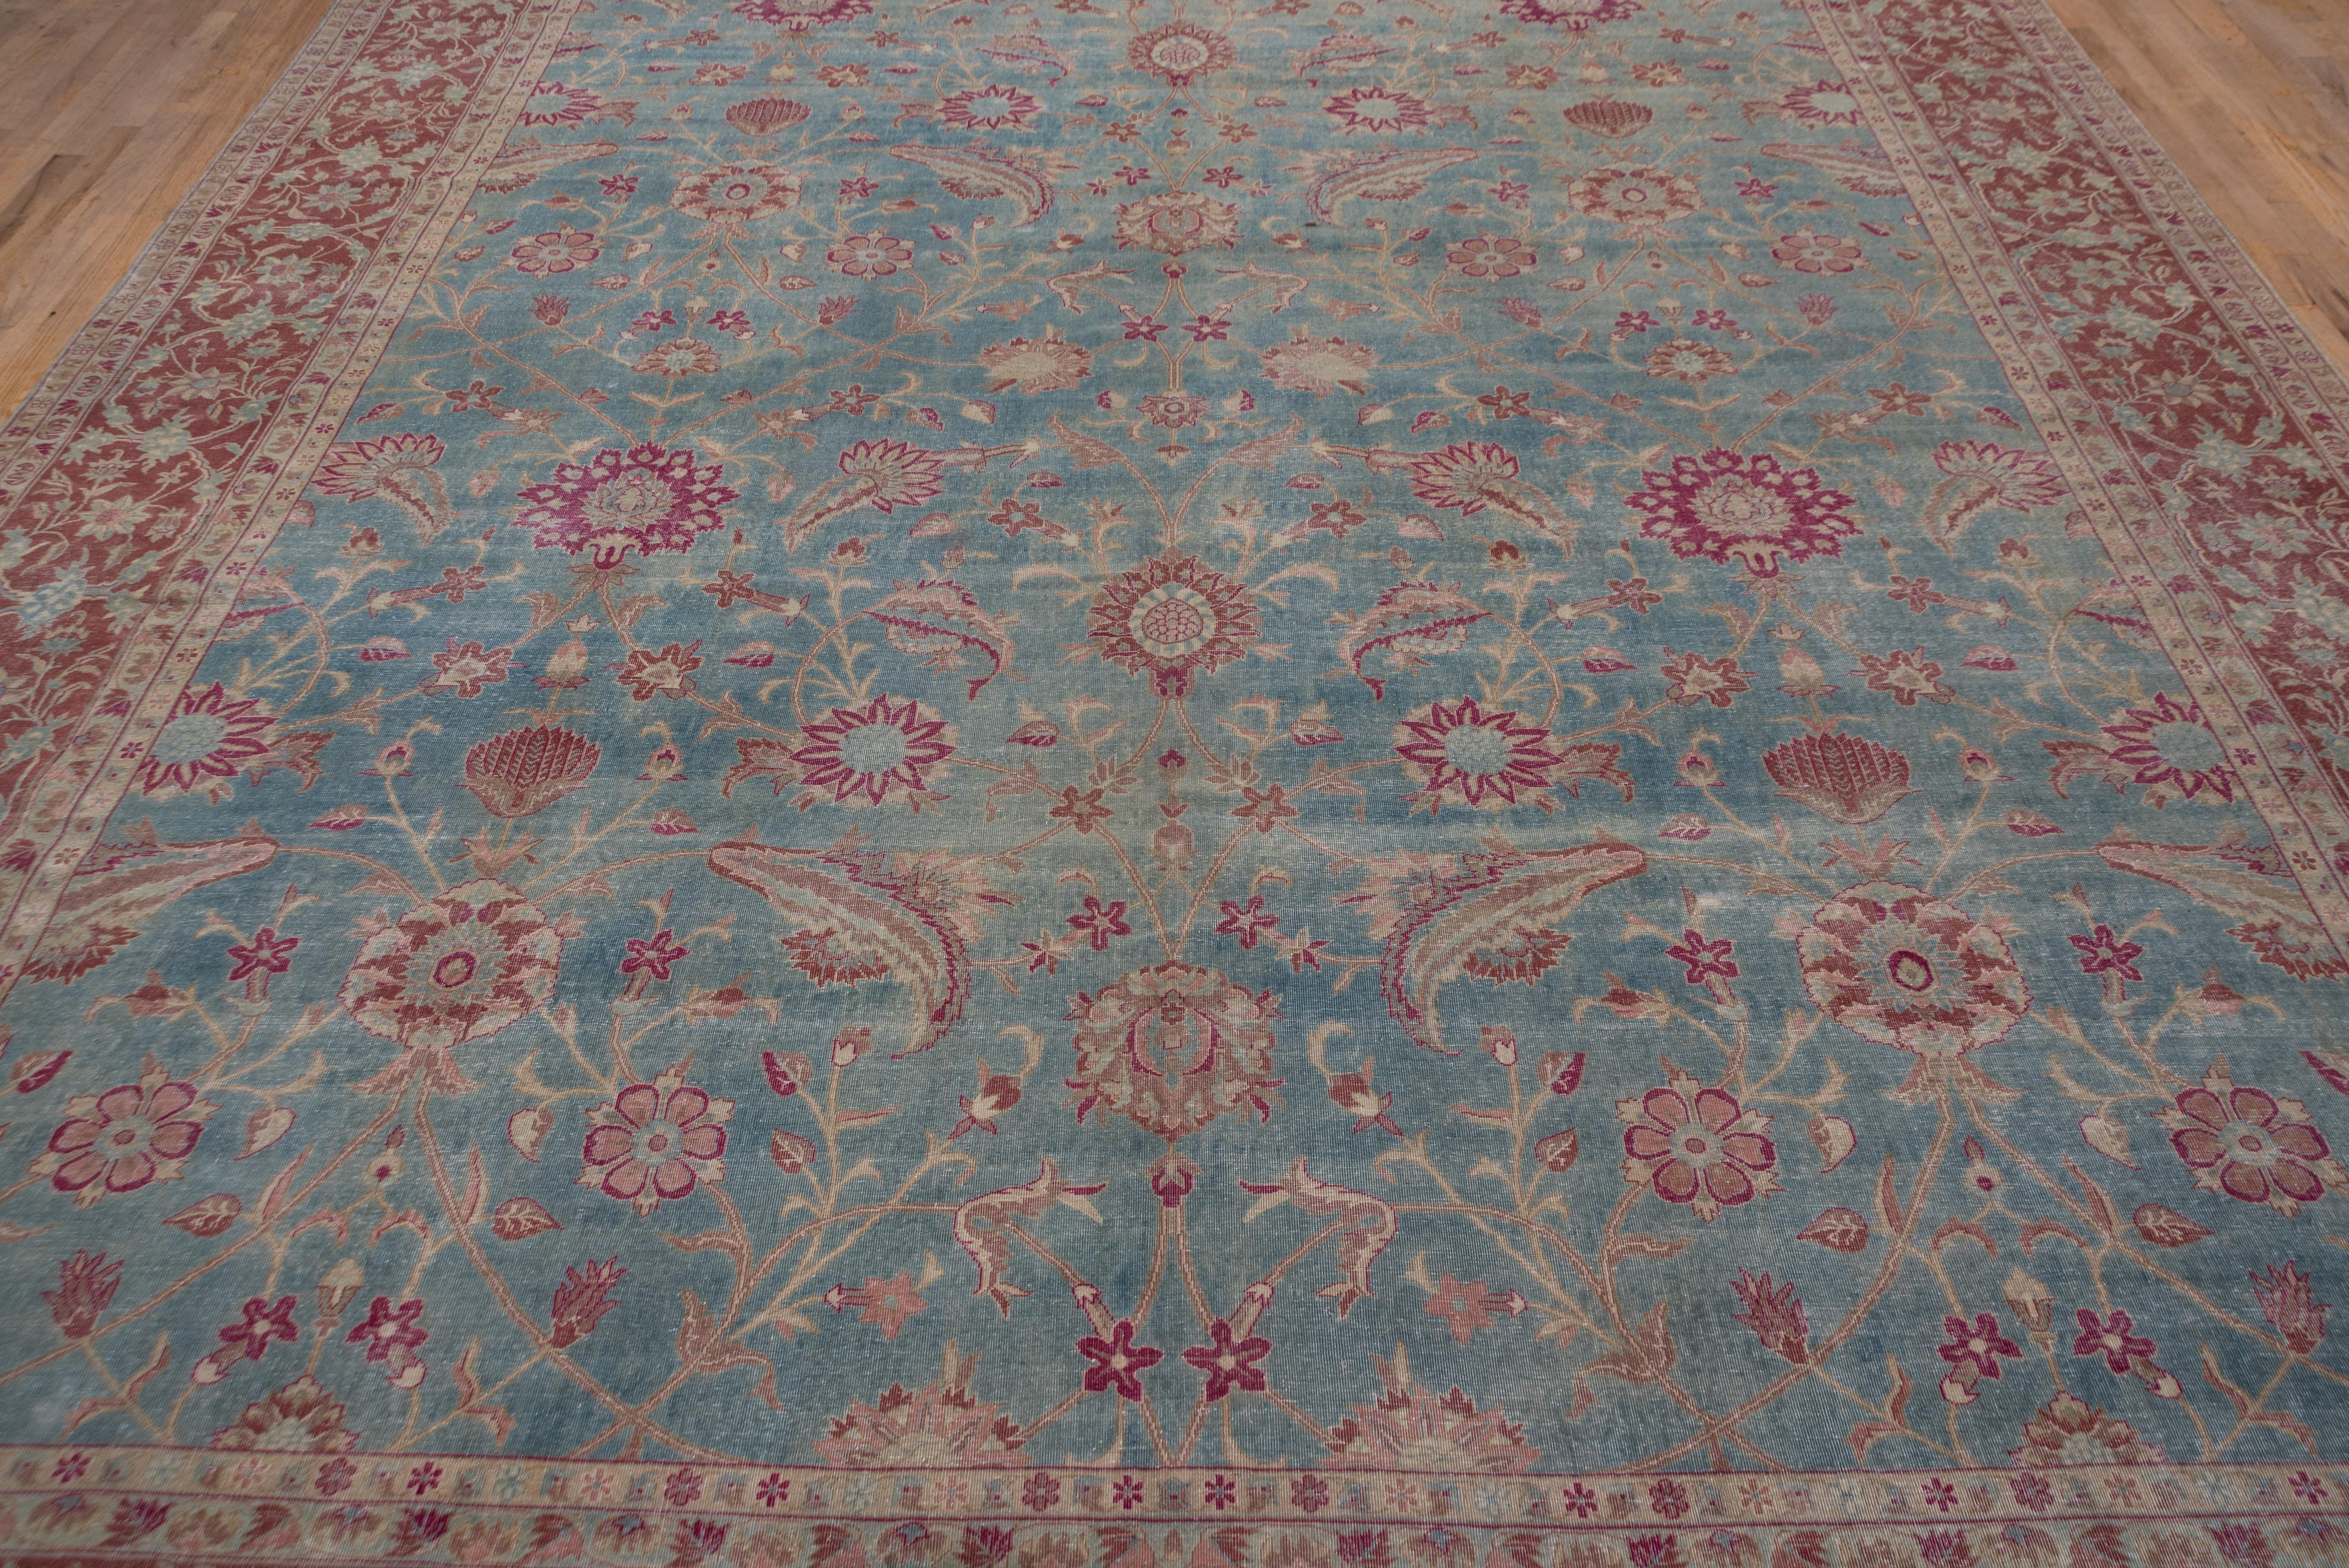 The light blue ground shows a spacious rising palmette allover pattern with large, barbed sickle leaves passing over rosettes in a quasi-three dimensional style. Red border with almost closed elliptical scrolls around rosettes. Cotton foundation.